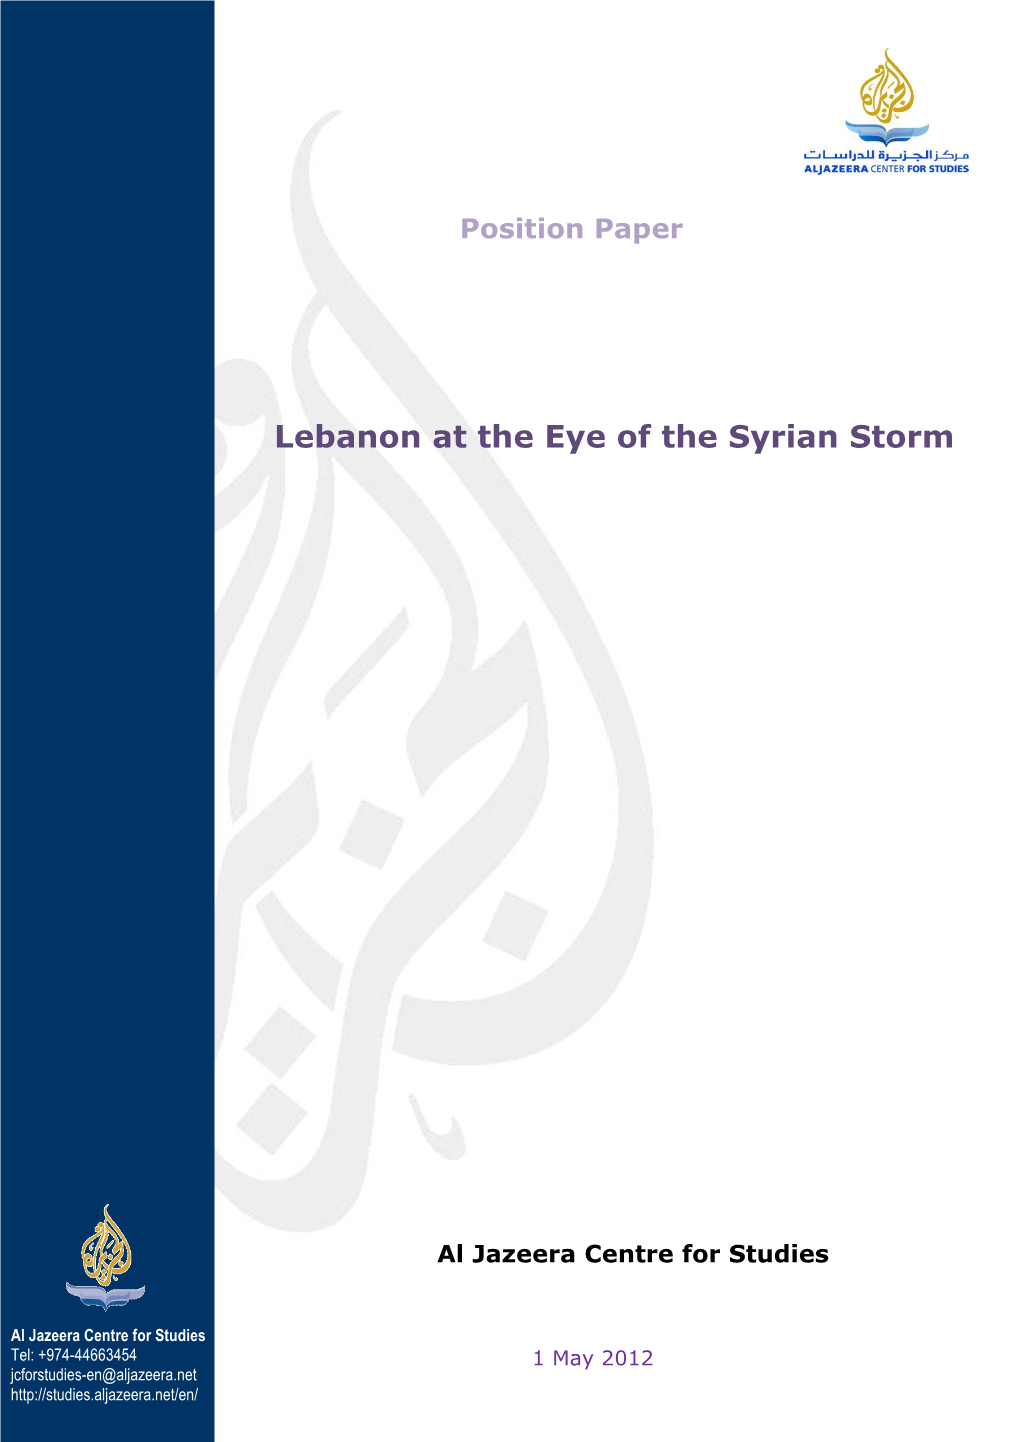 Lebanon at the Eye of the Syrian Storm